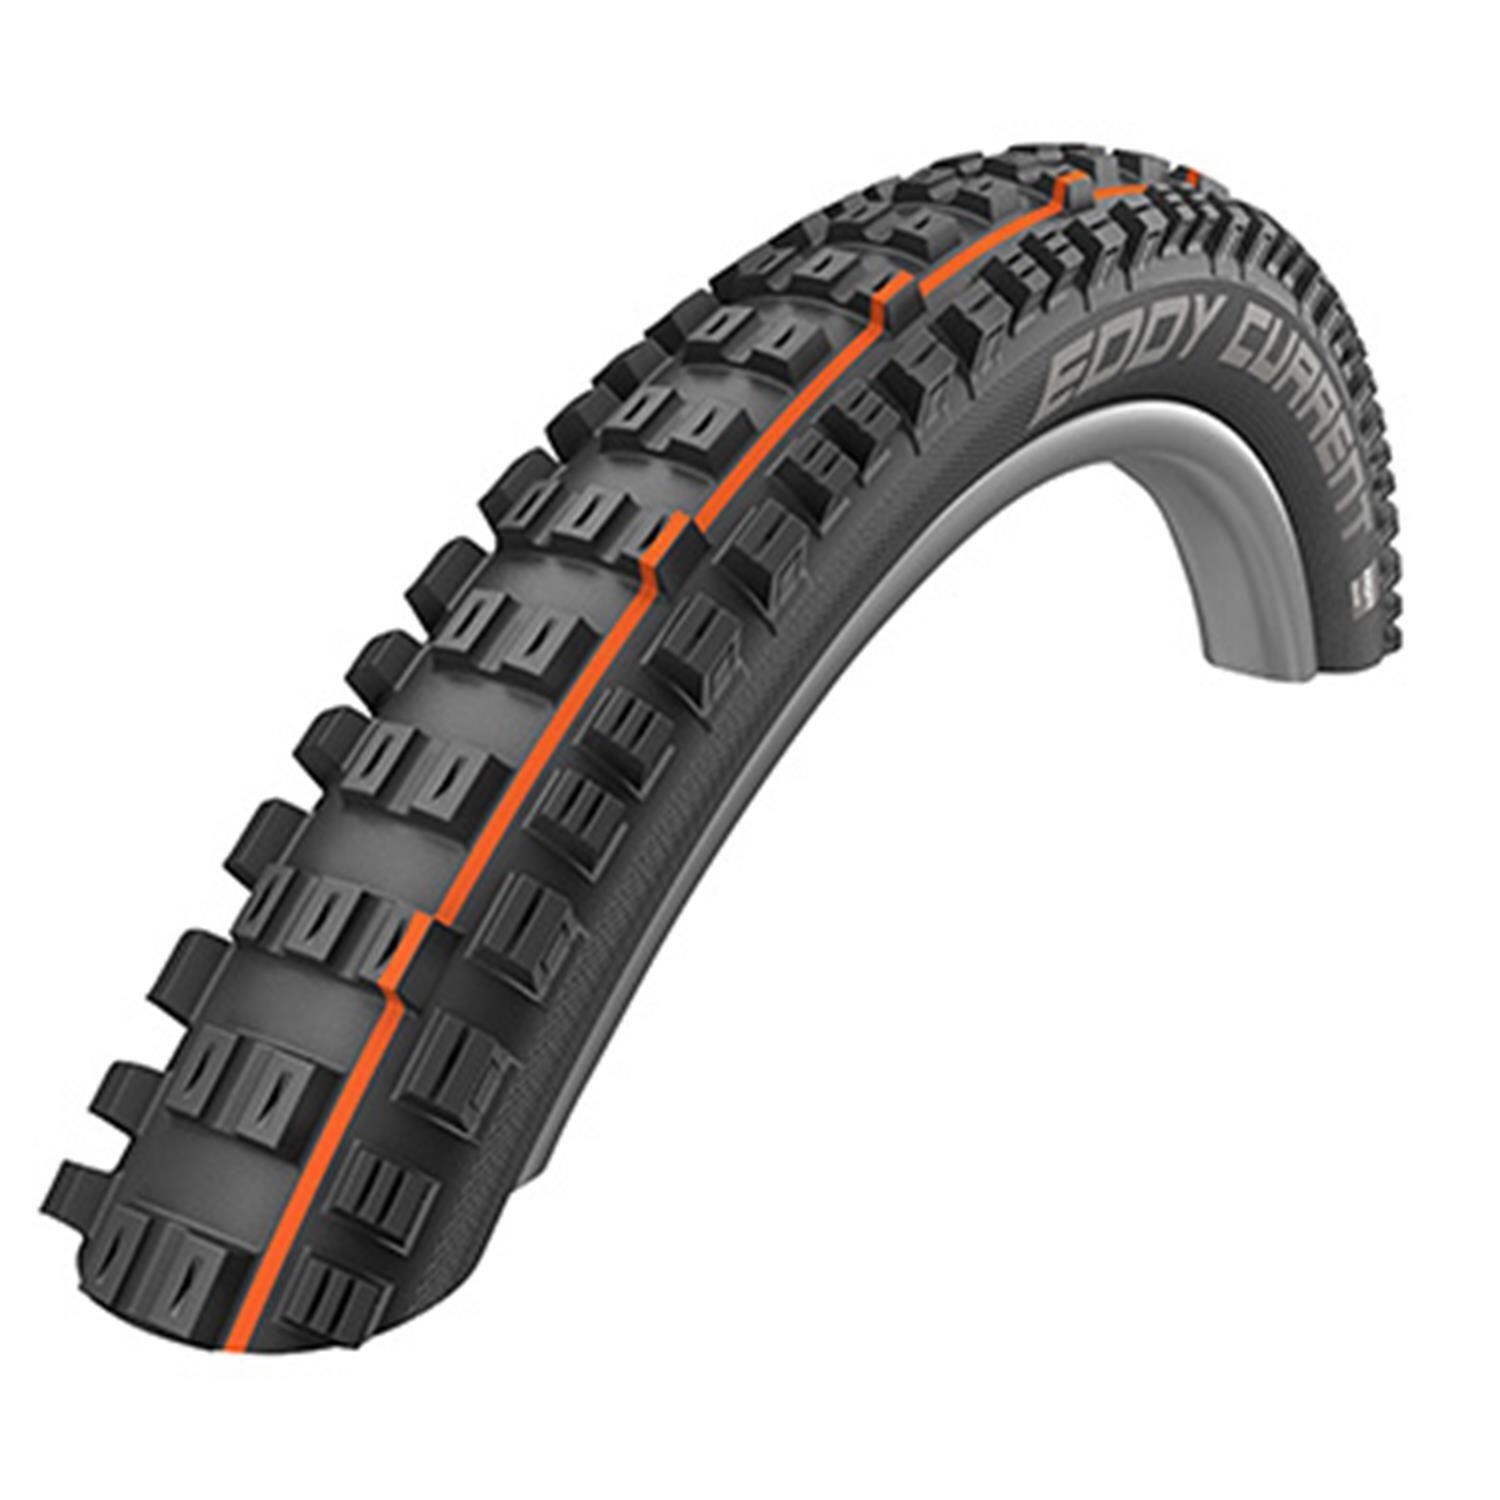 SCHWALBE Schwalbe EDDY CURRENT Front Super Trail 29 x 2.4 TLE Tyre